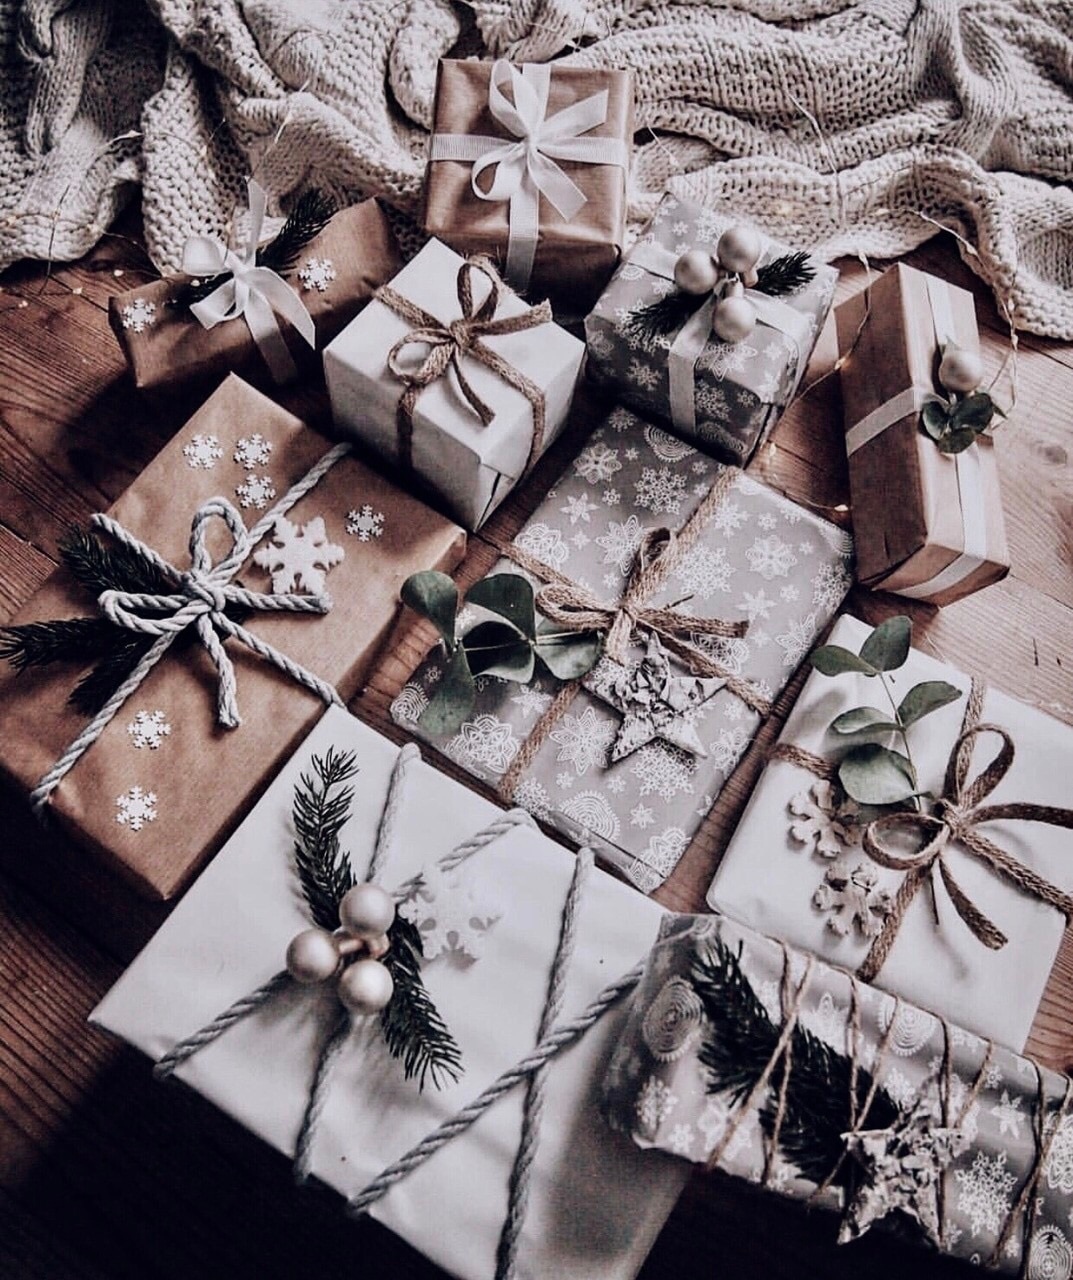 A table with many wrapped gifts with white and brown paper and string. - Silver